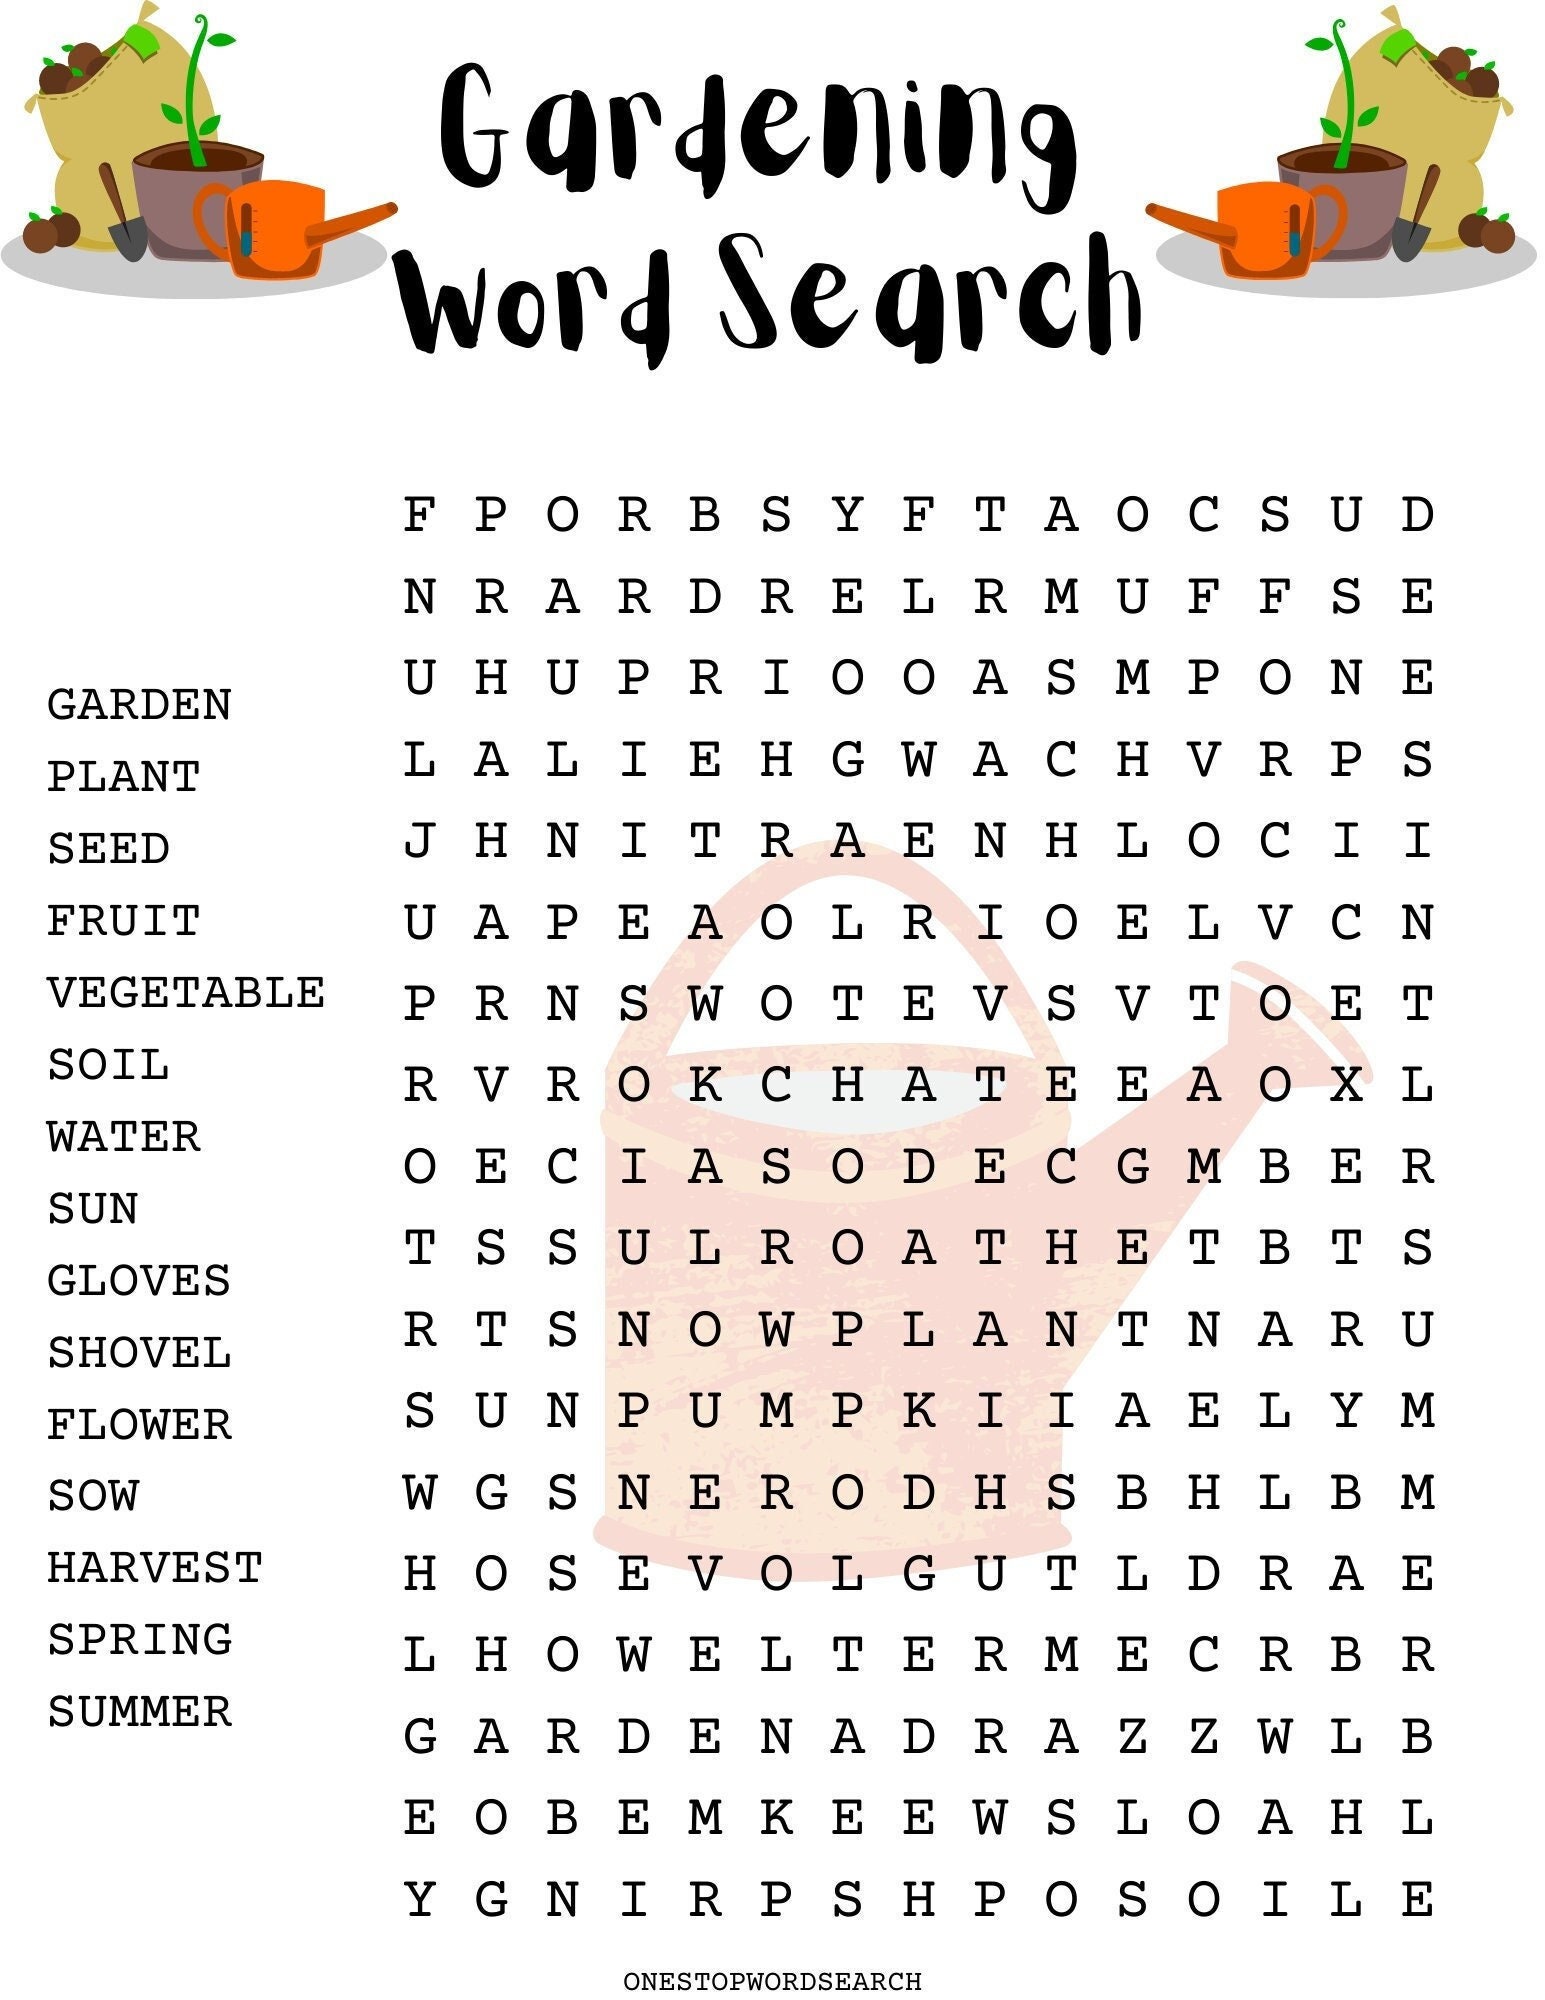 How does the Daily Puzzle work? — Garden of Words Help Center